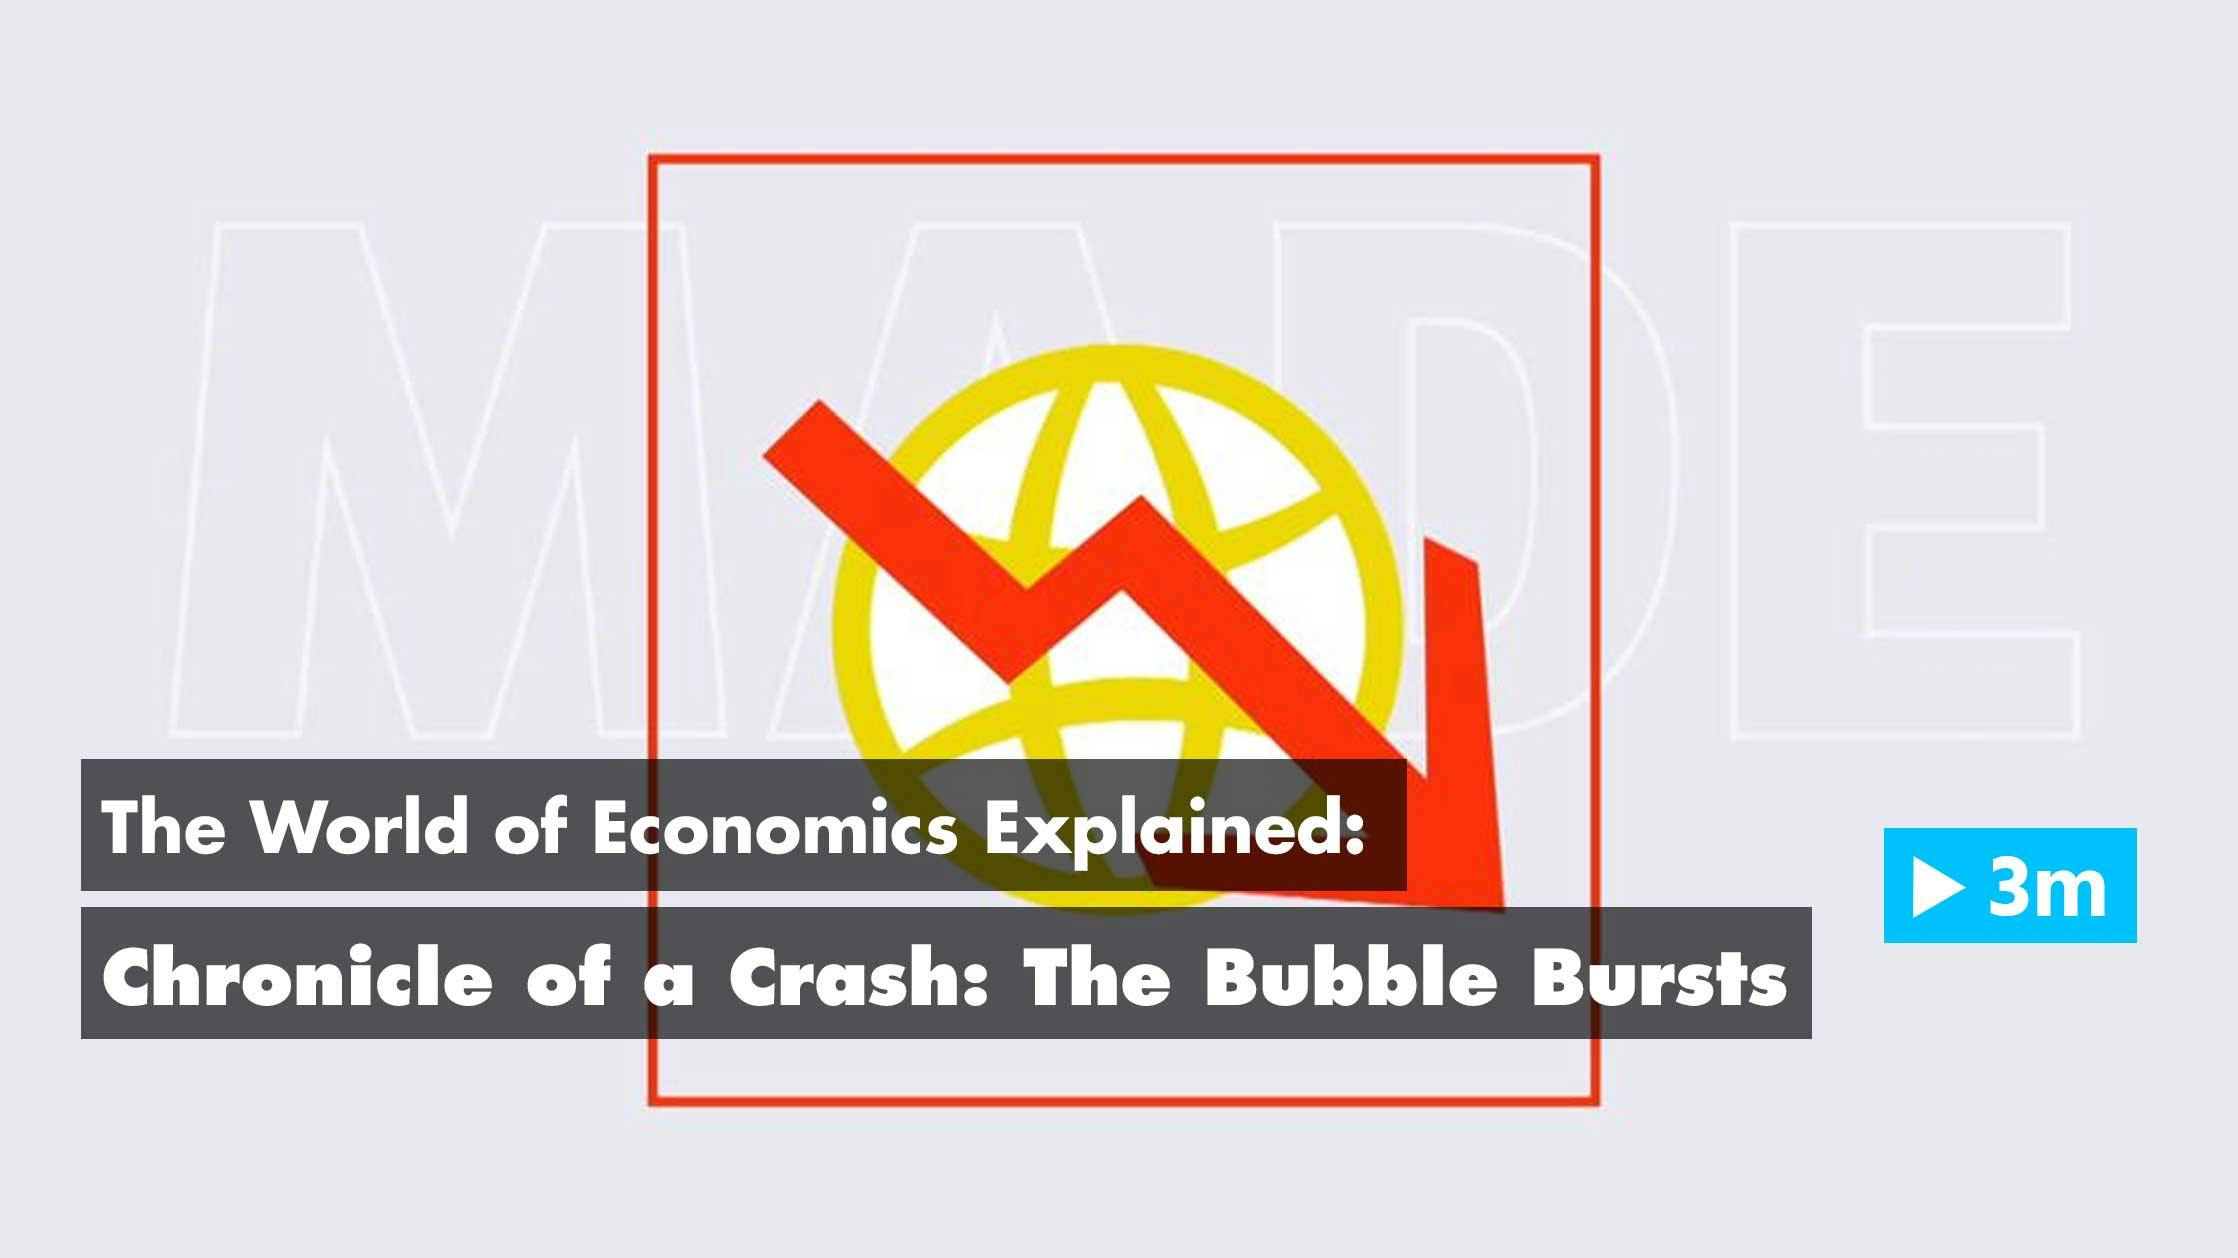 The World of Economics Explained: Chronicle of a crash of the Bubble